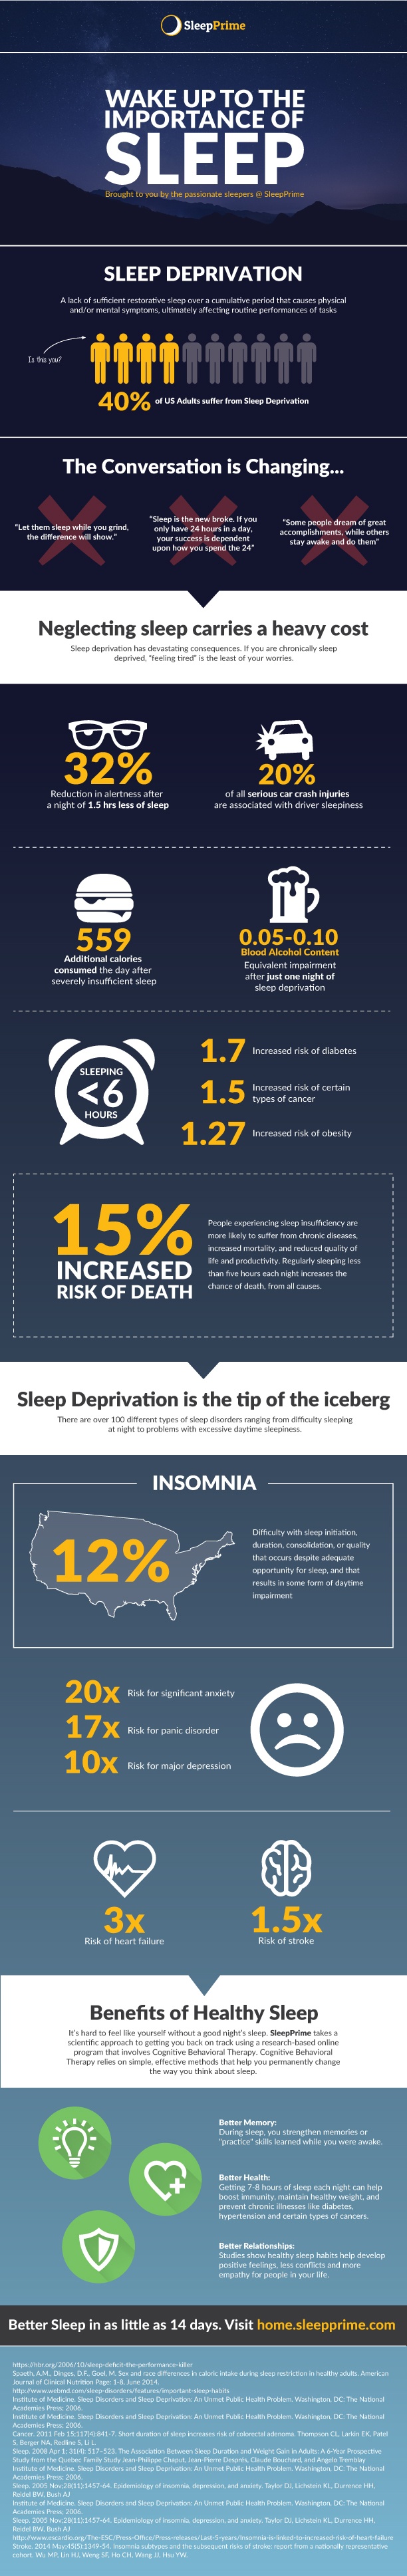 Wake-Up-to-the-Importance-of-Sleep1